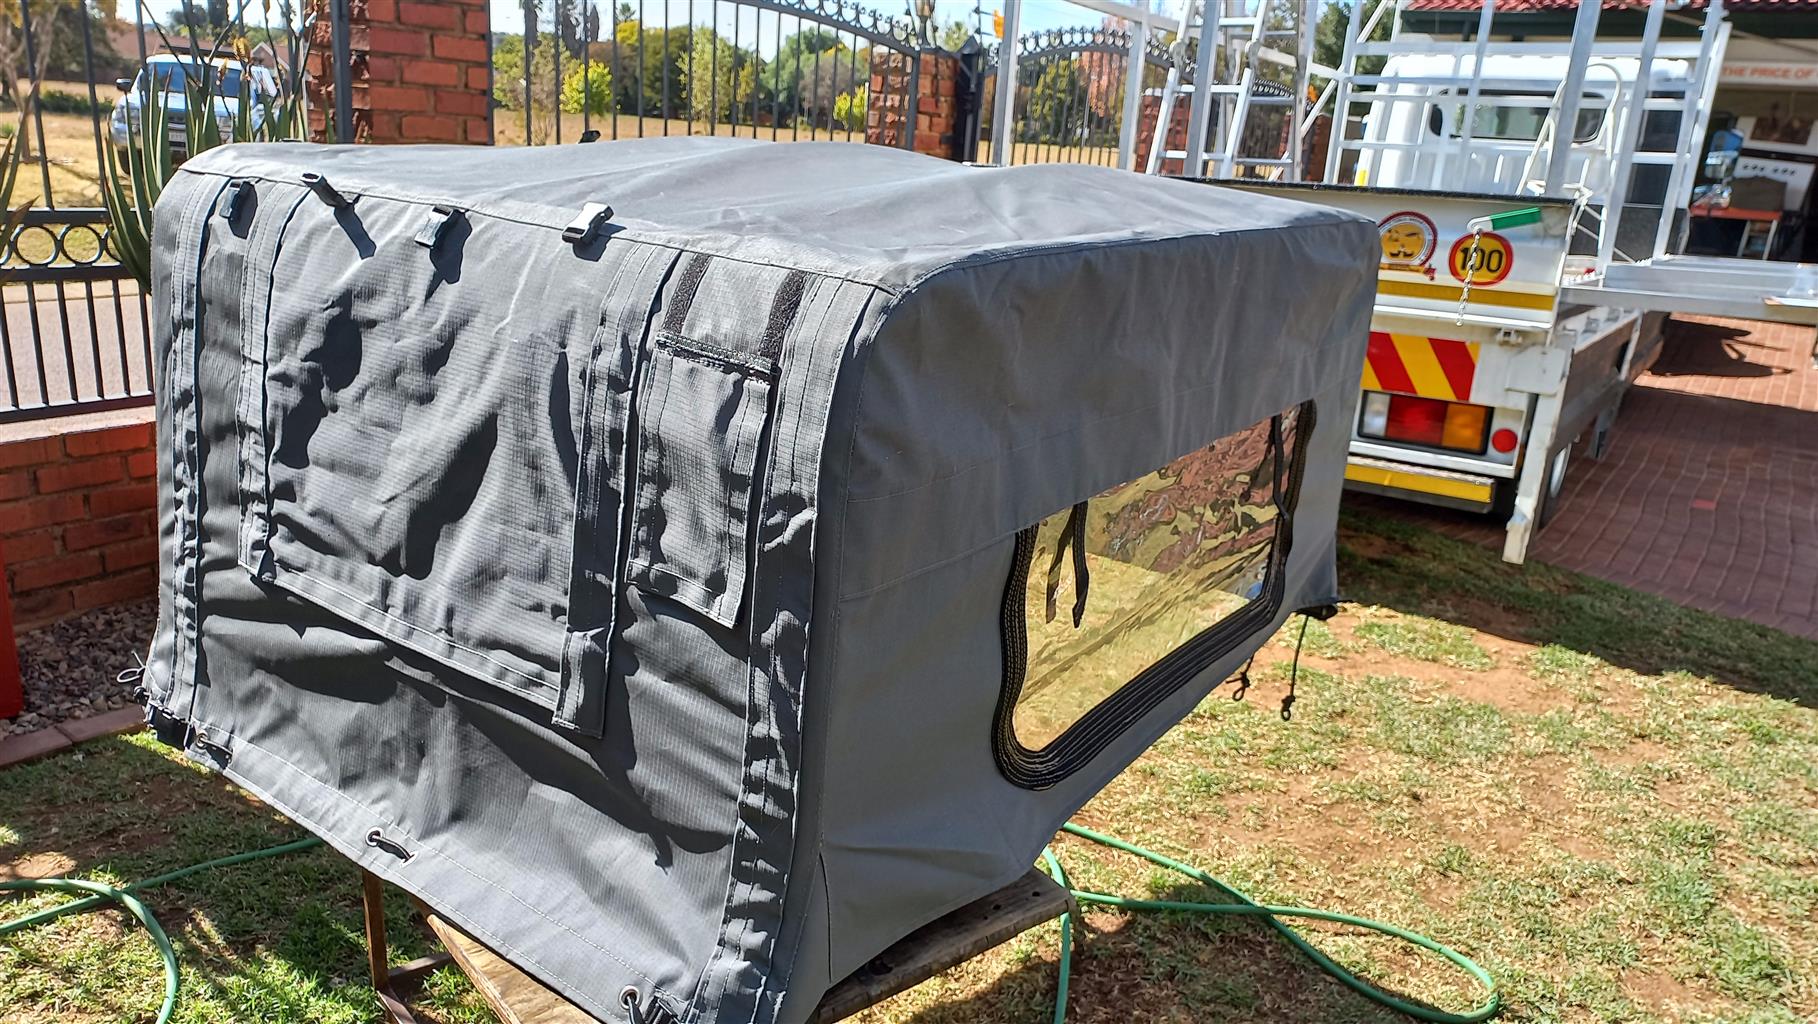 Canvas canopy Land rover 90, new.